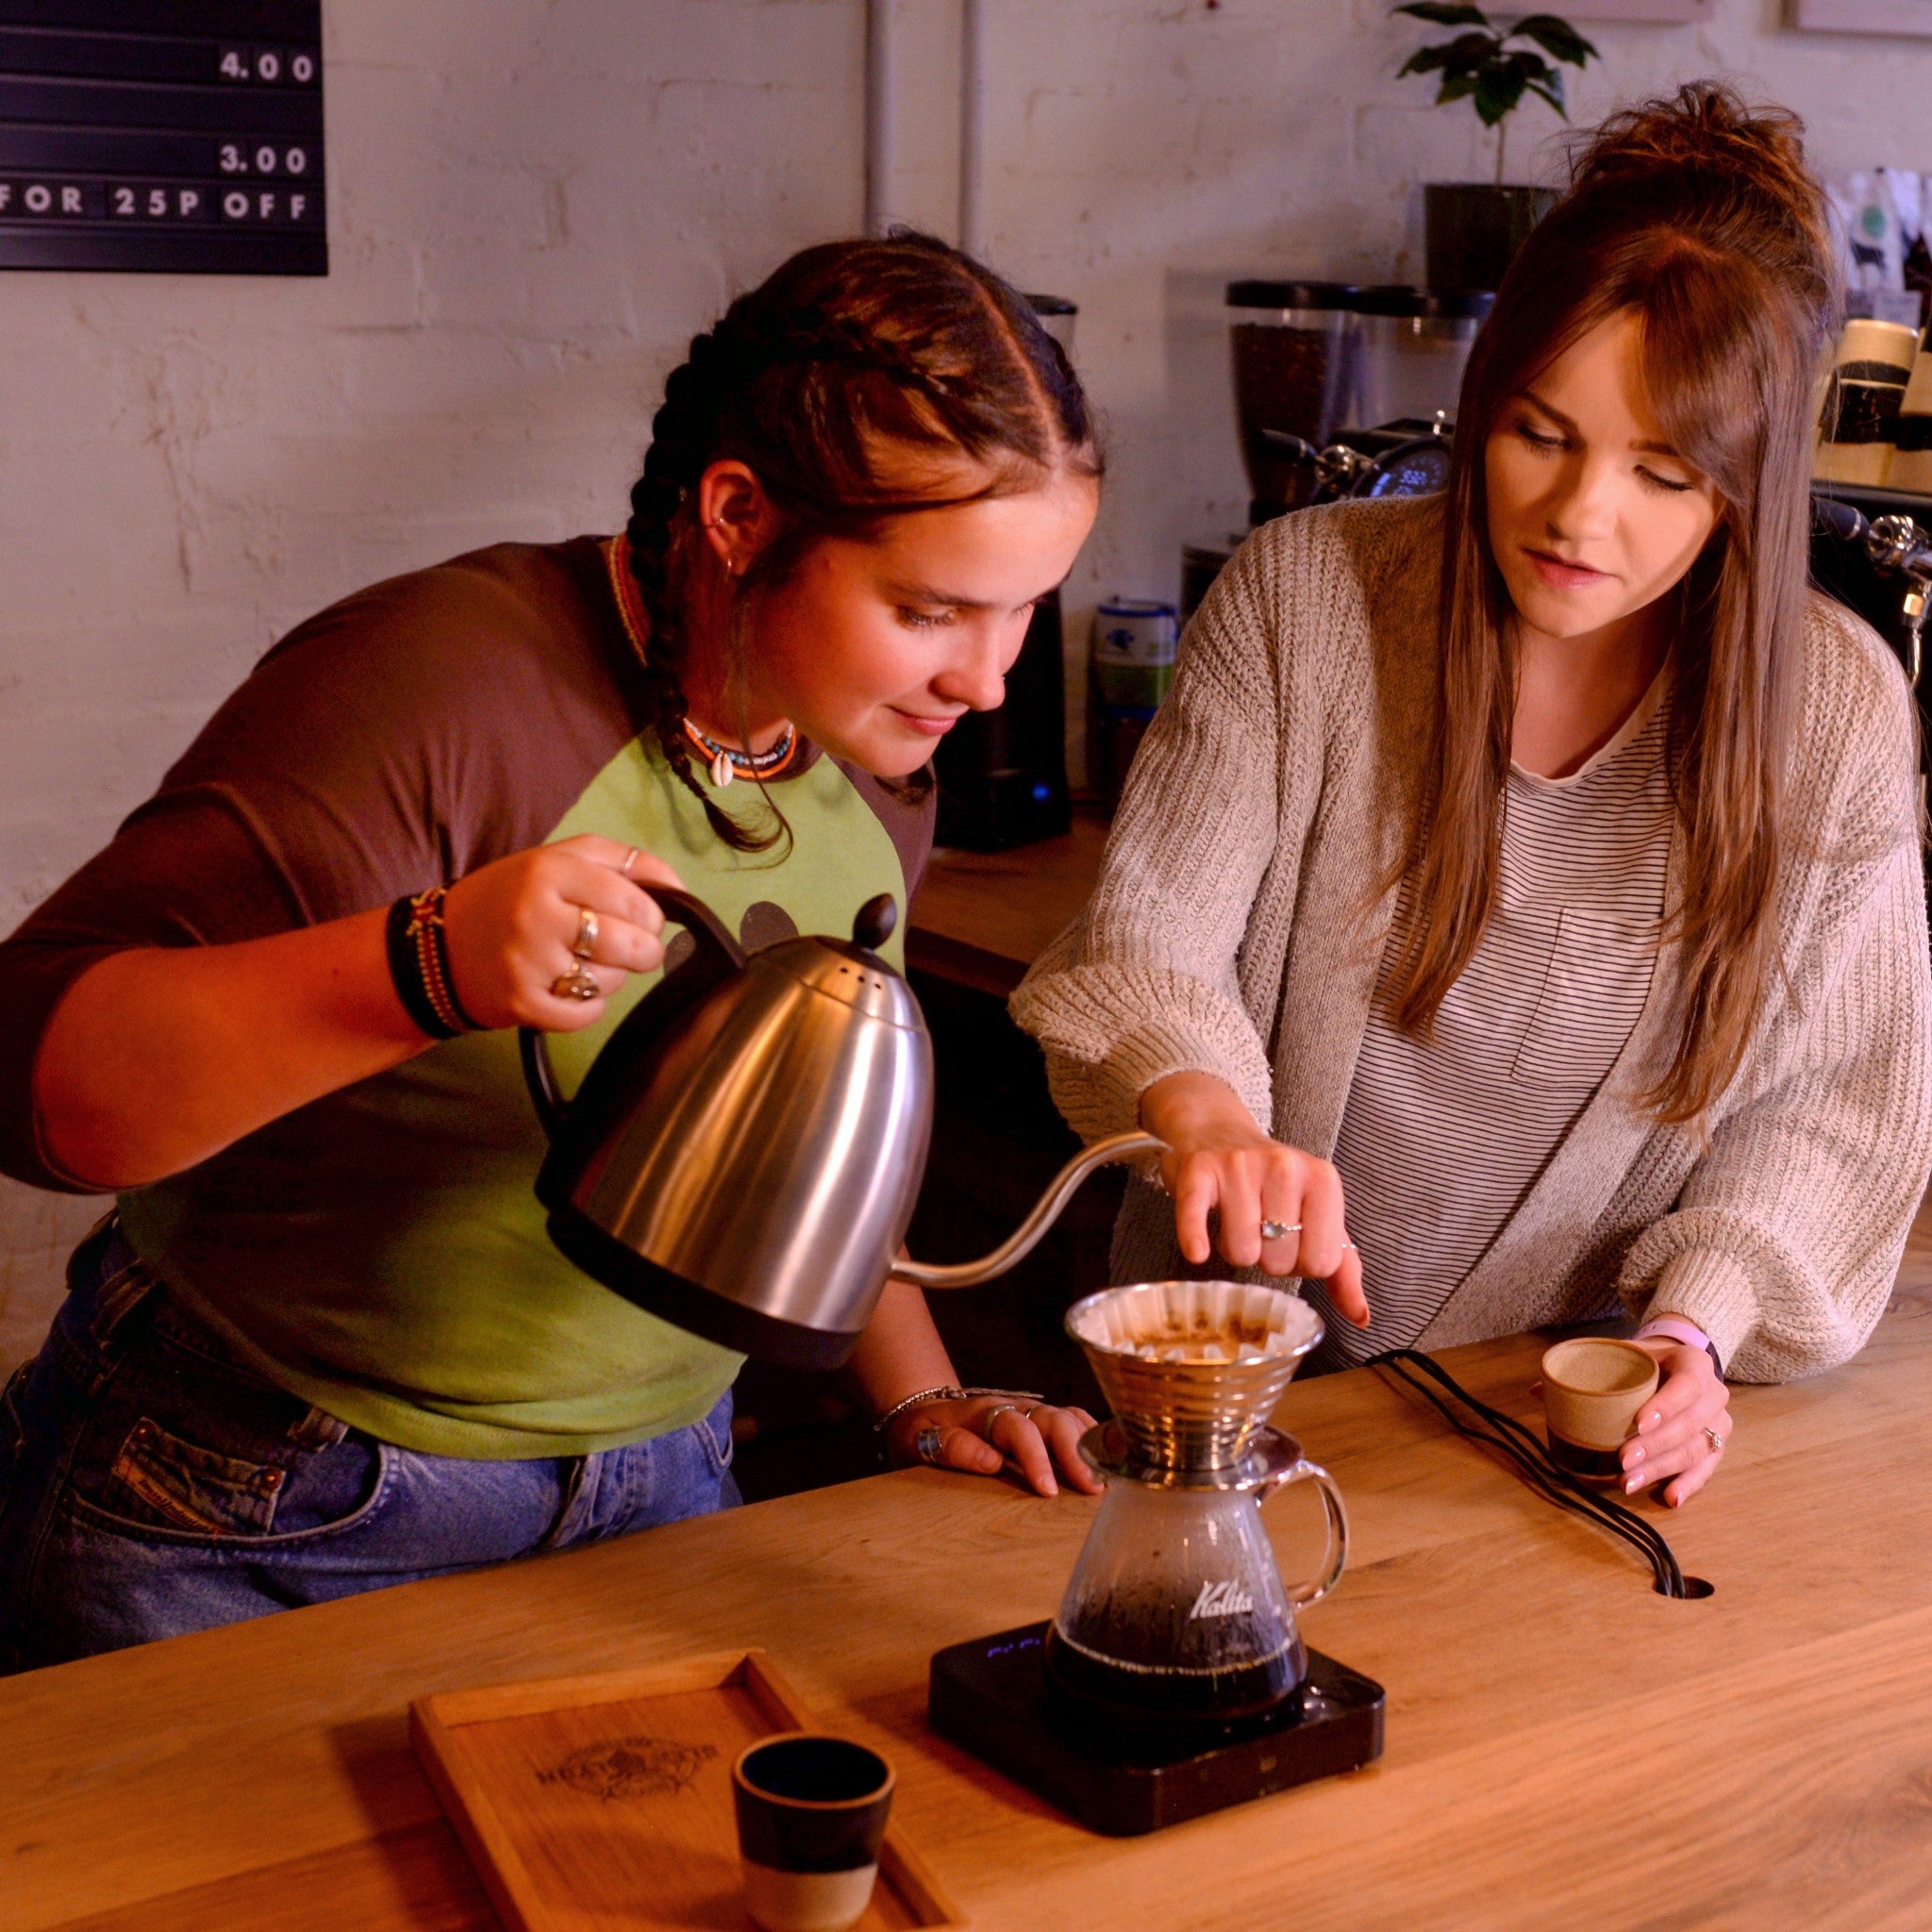 Two people stand behind the bar making a pour over at Glen Lyon Coffee Roasters roastery cafe